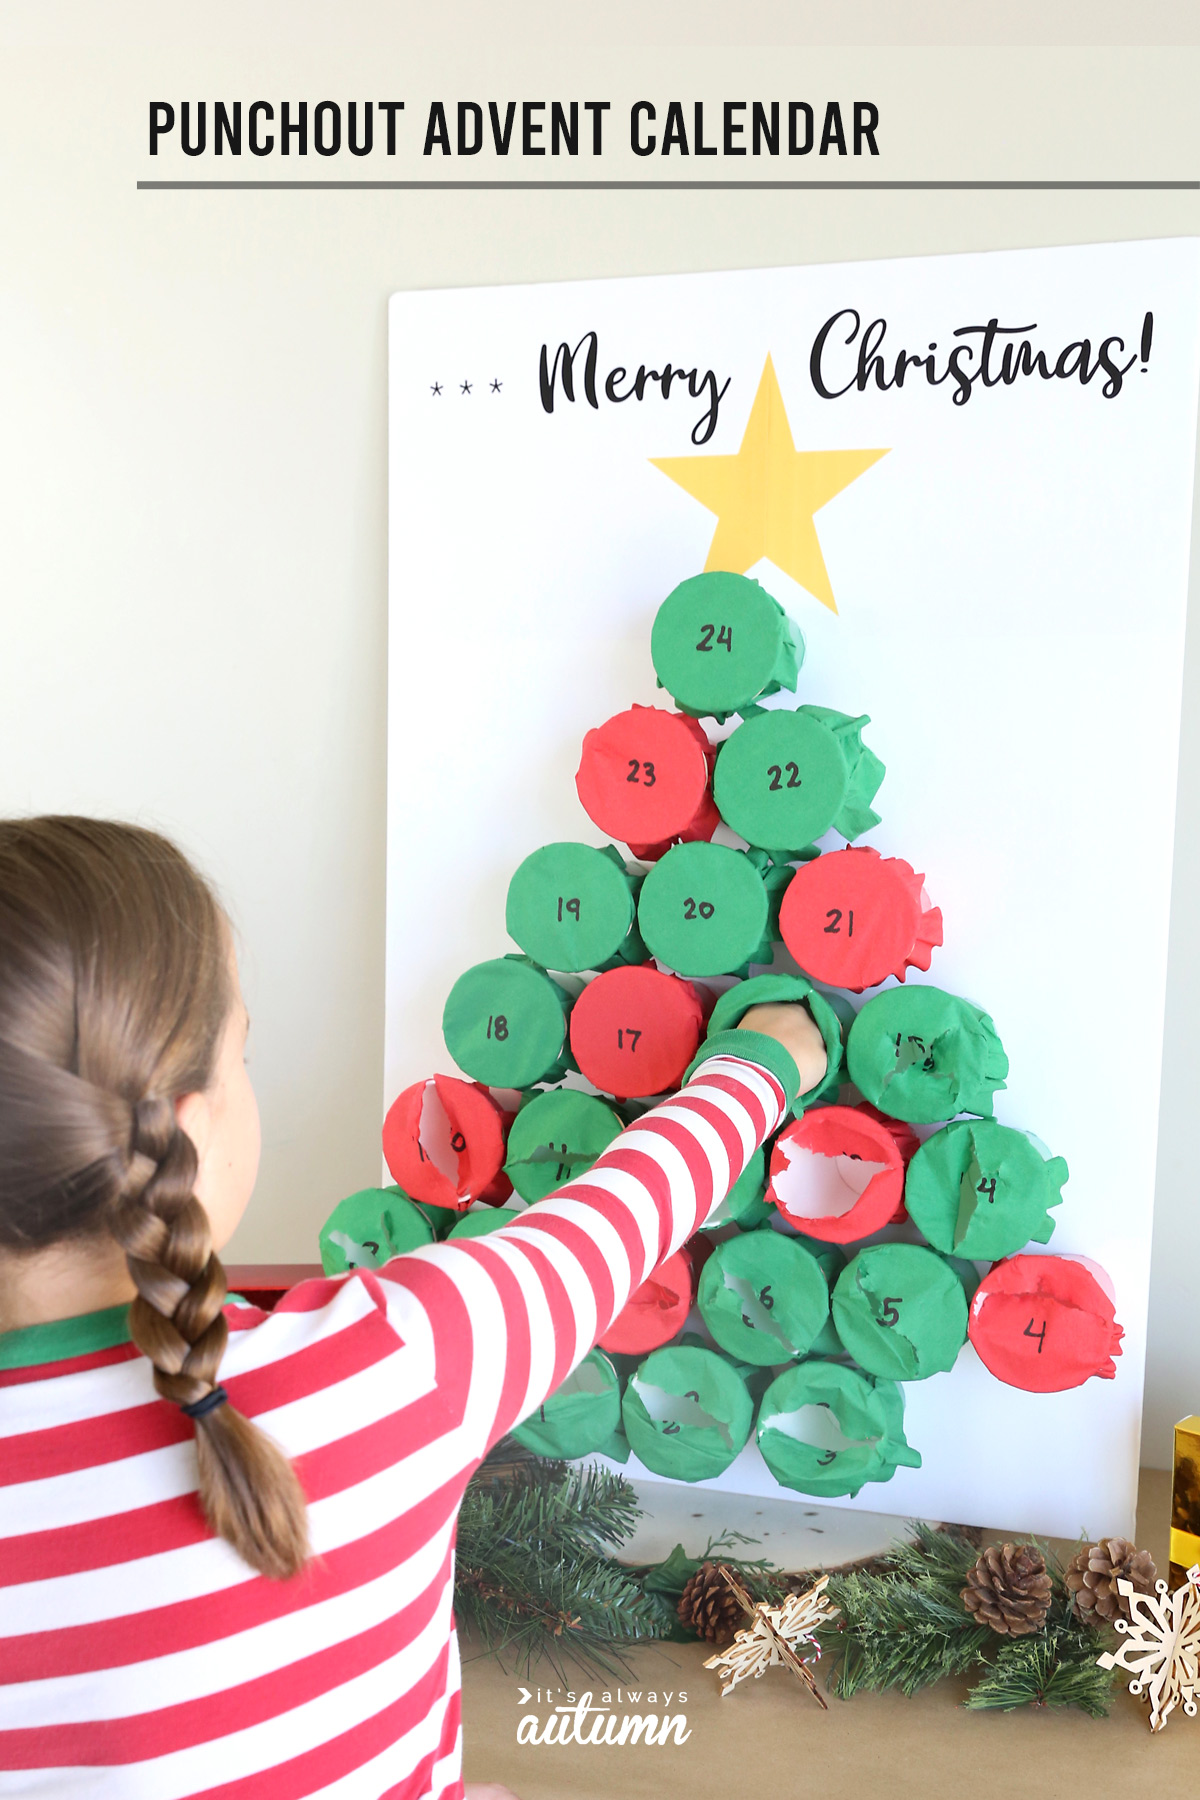 How to make a punchout Advent Calendar for Christmas